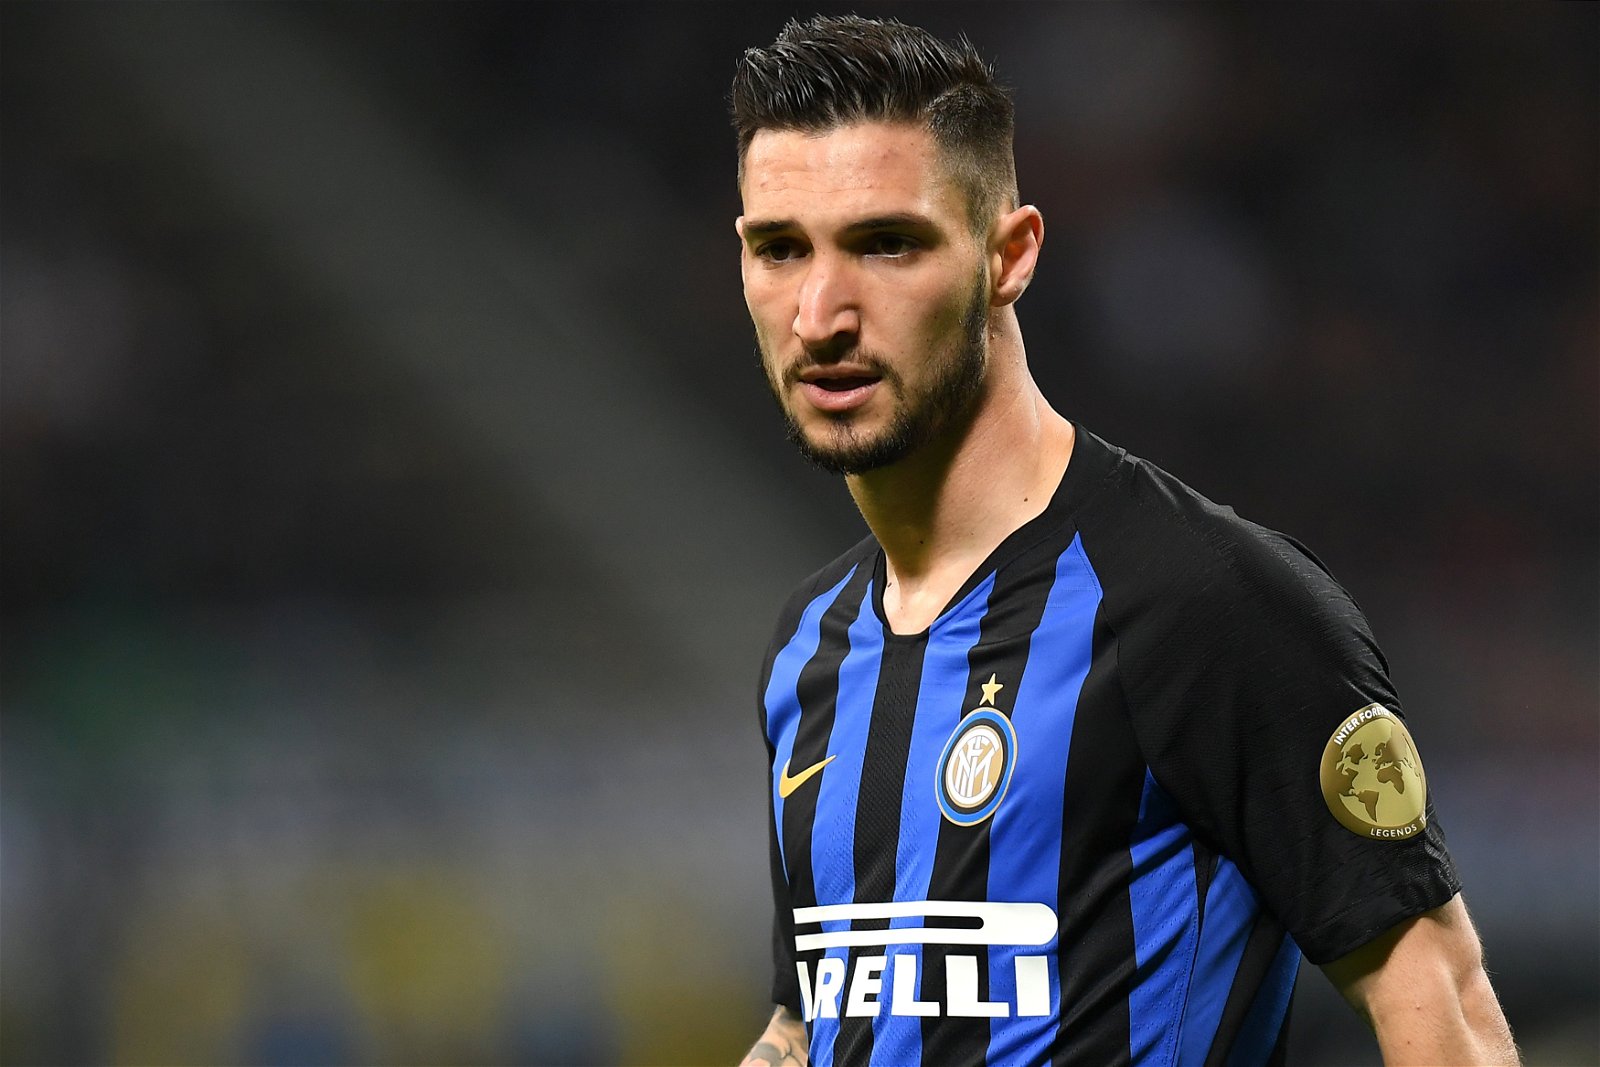 Inter Milan winger Matteo Politano to miss a month with ankle injury